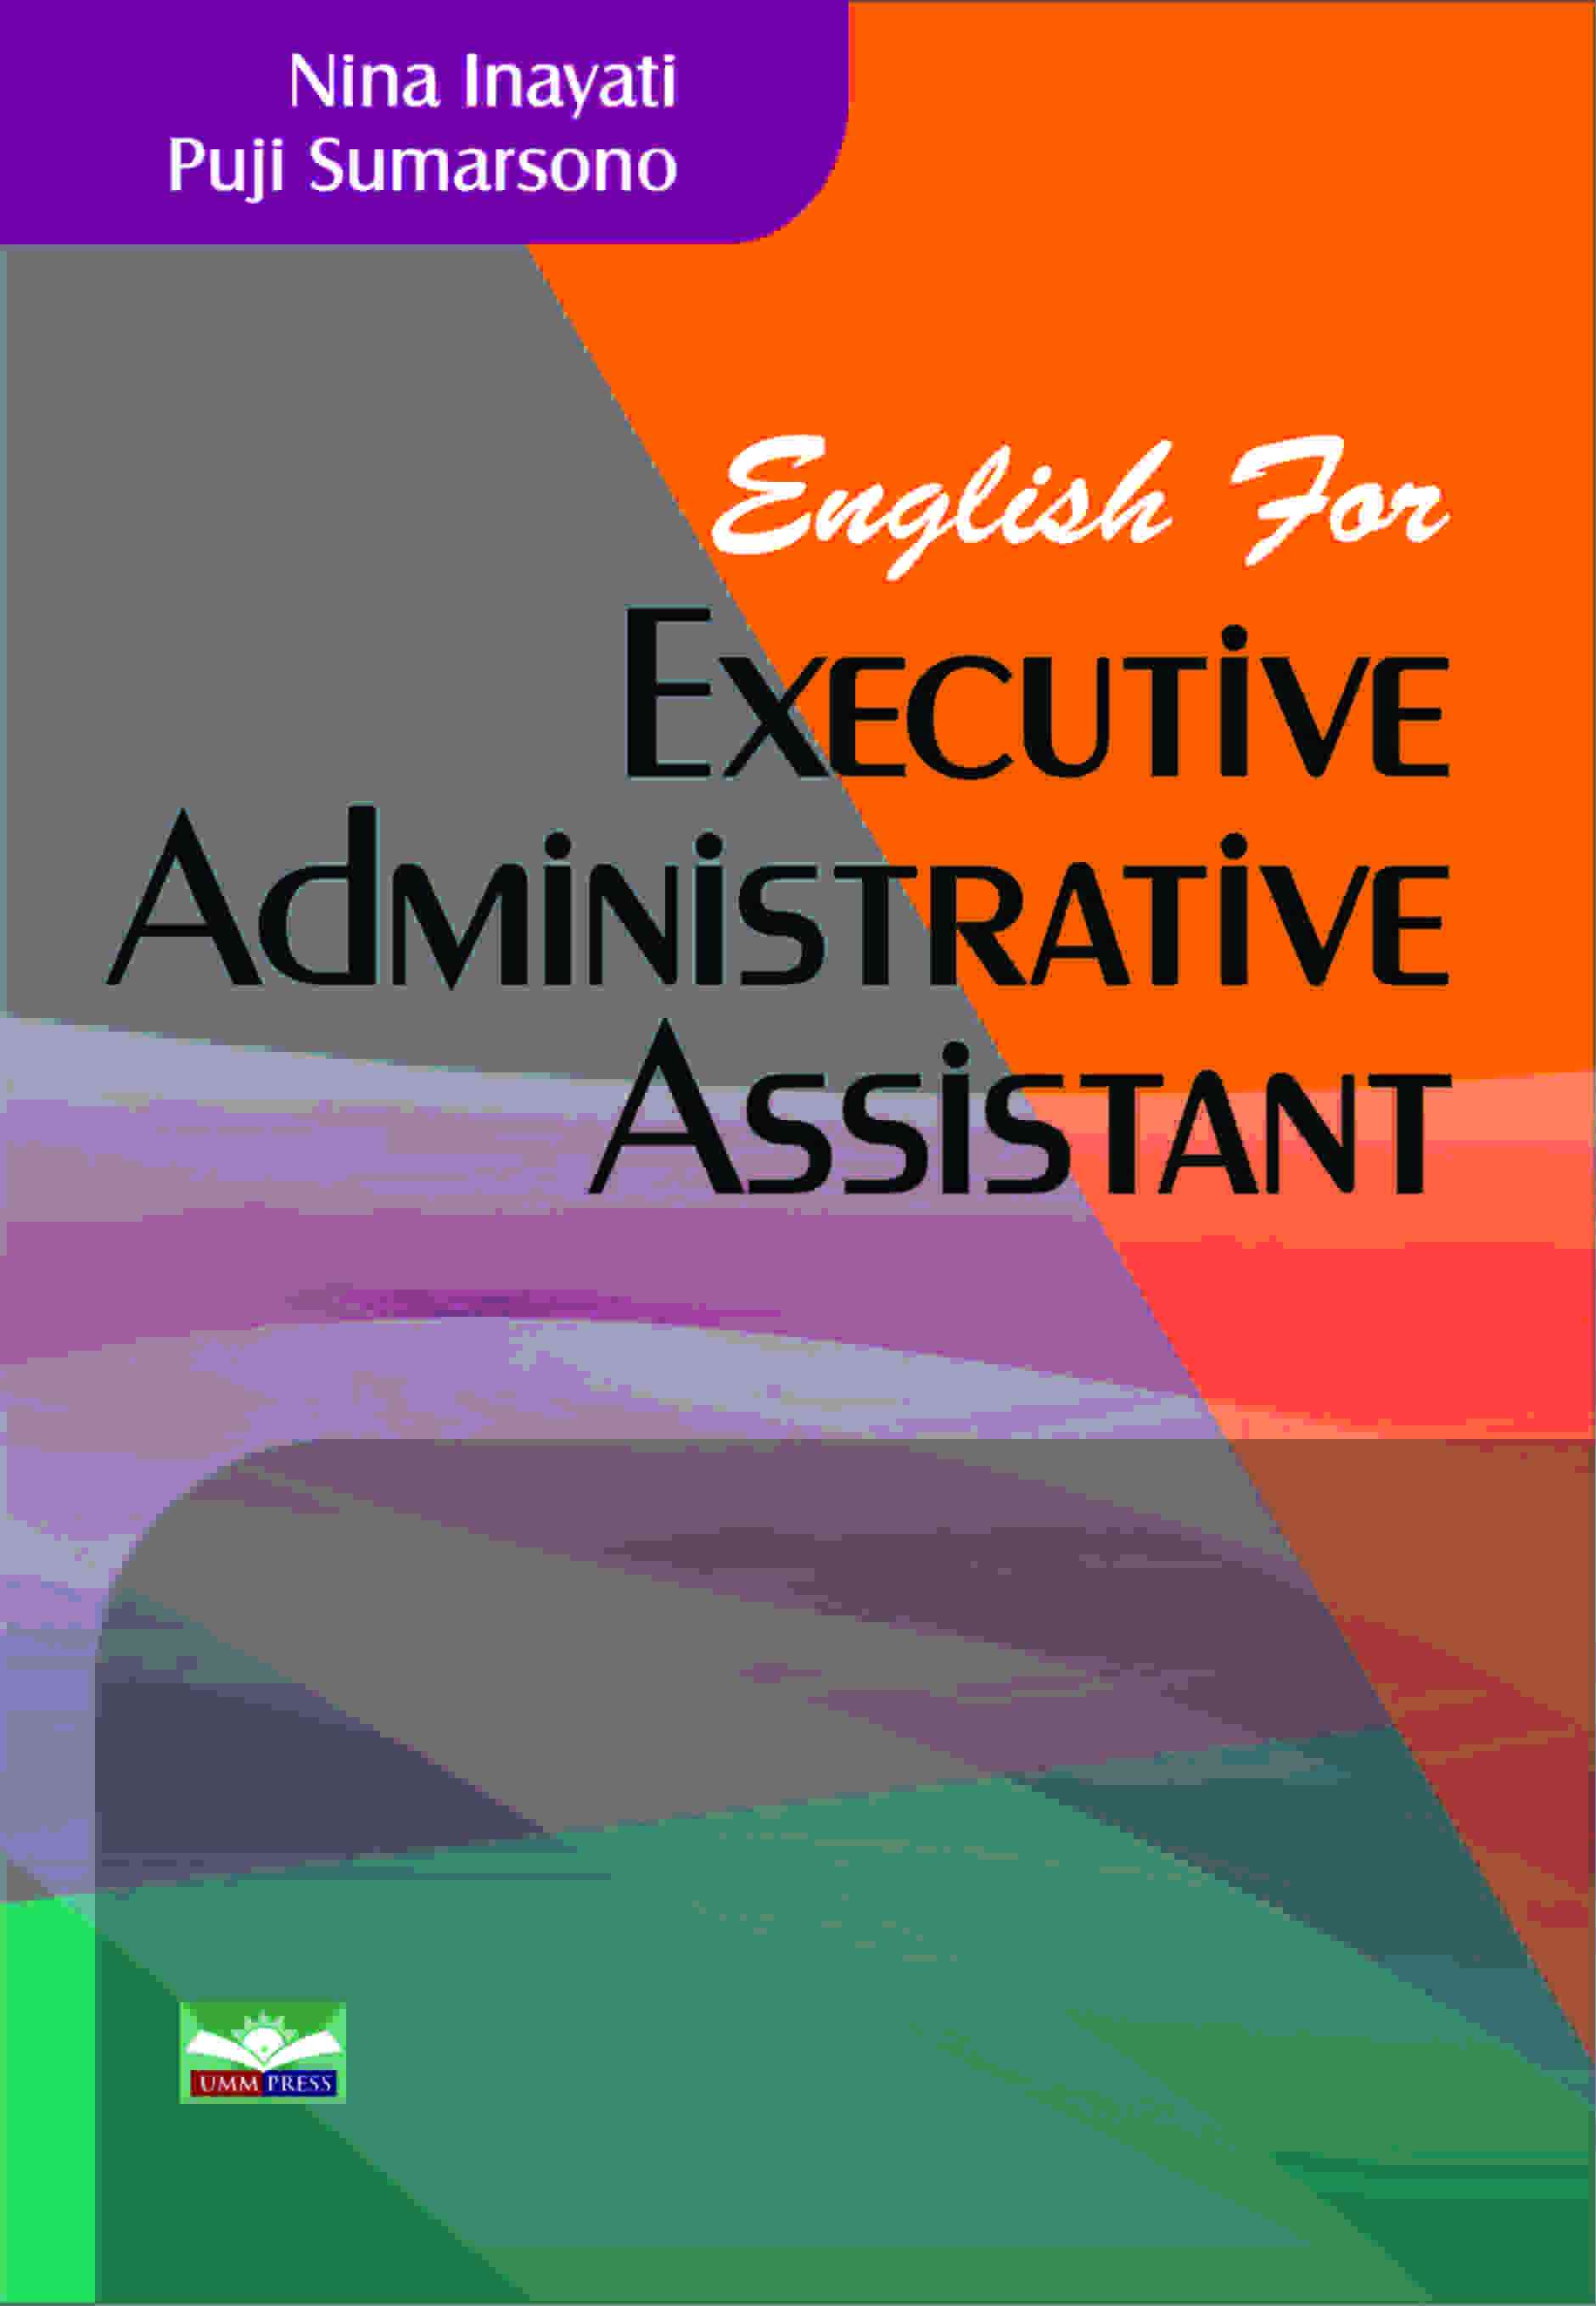 ENGLISH FOR EXECUTIVE ADMINISTRATIVE ASSISTANT